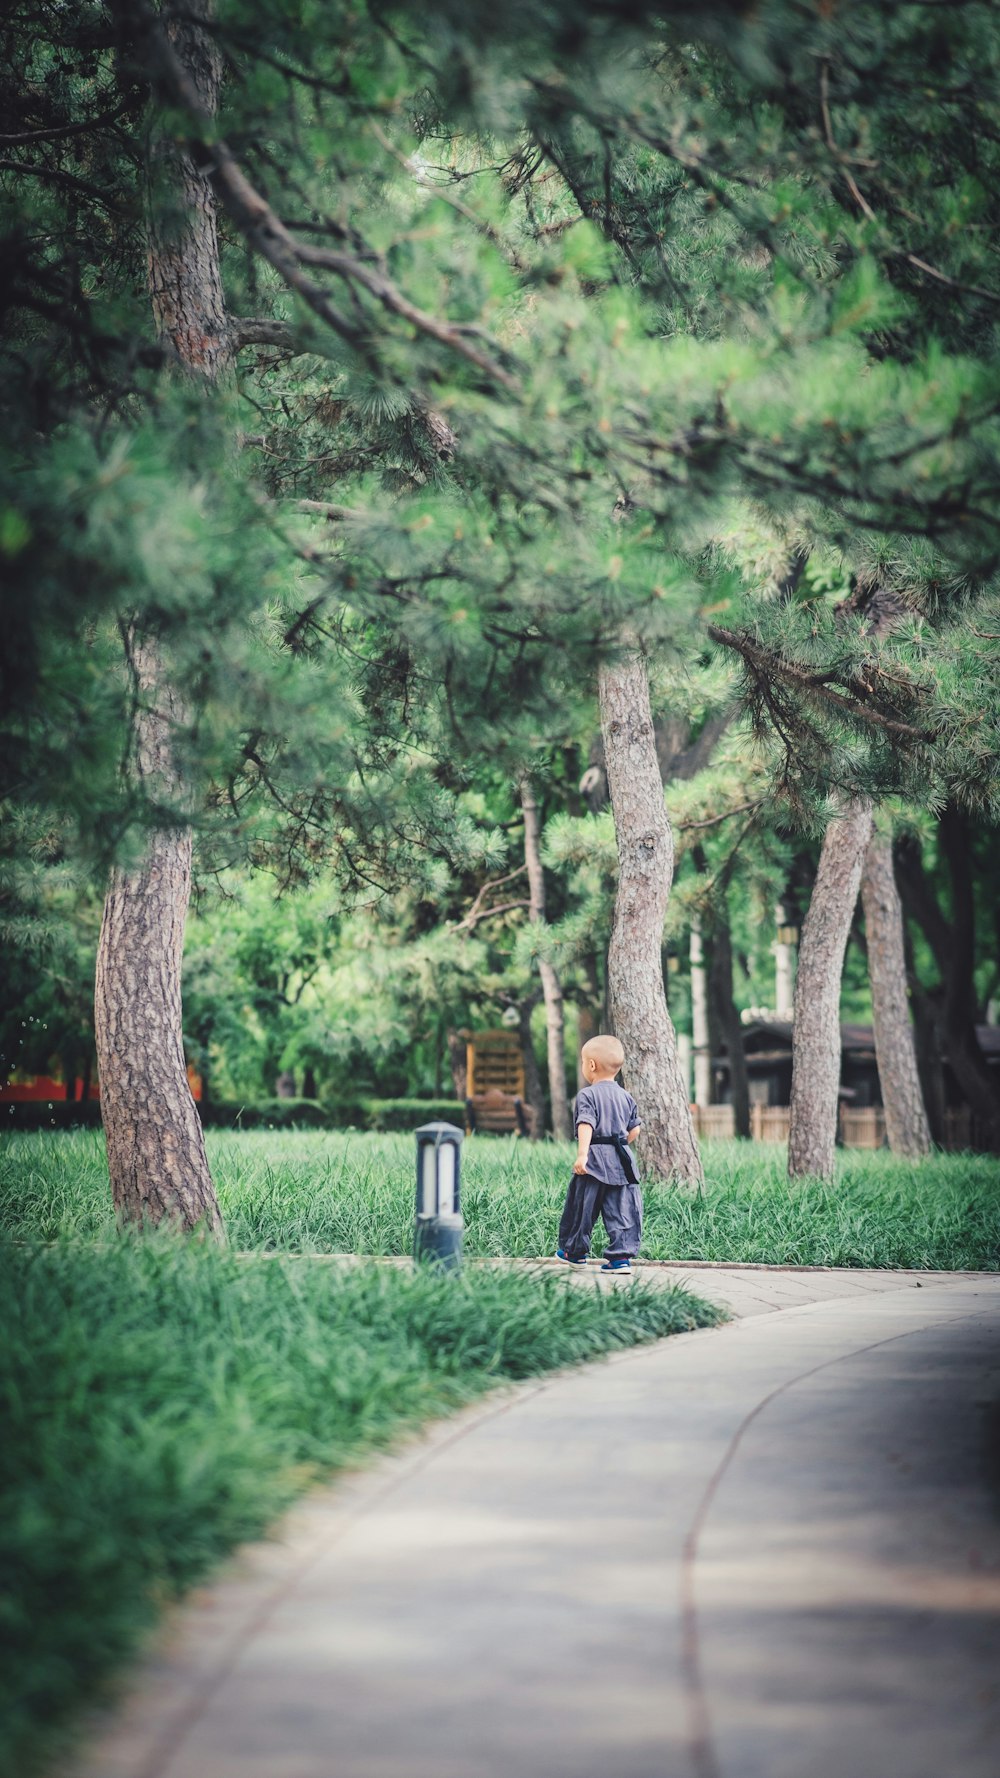 kid walking in a concrete road near trees during daytime